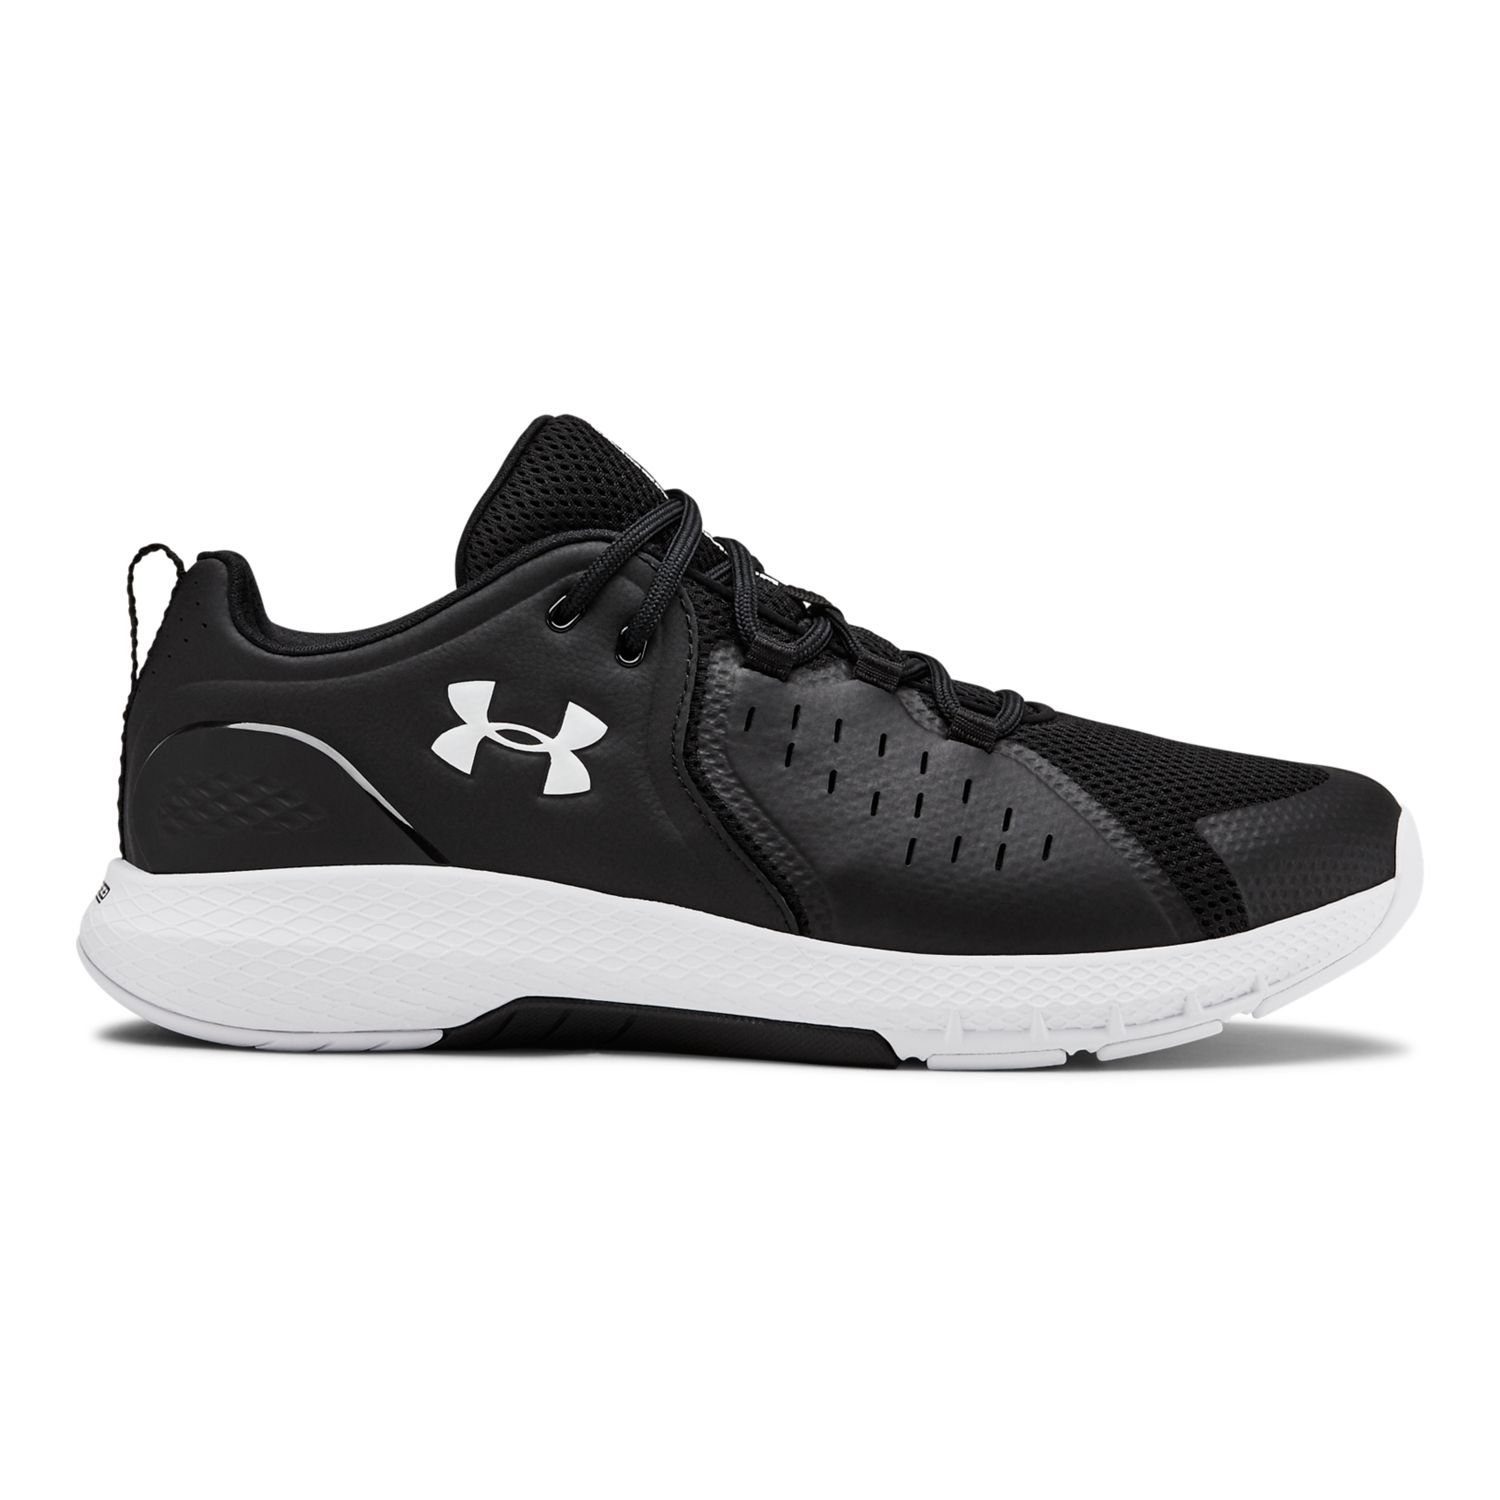 Under Armour Charged Commit 2 Men's 